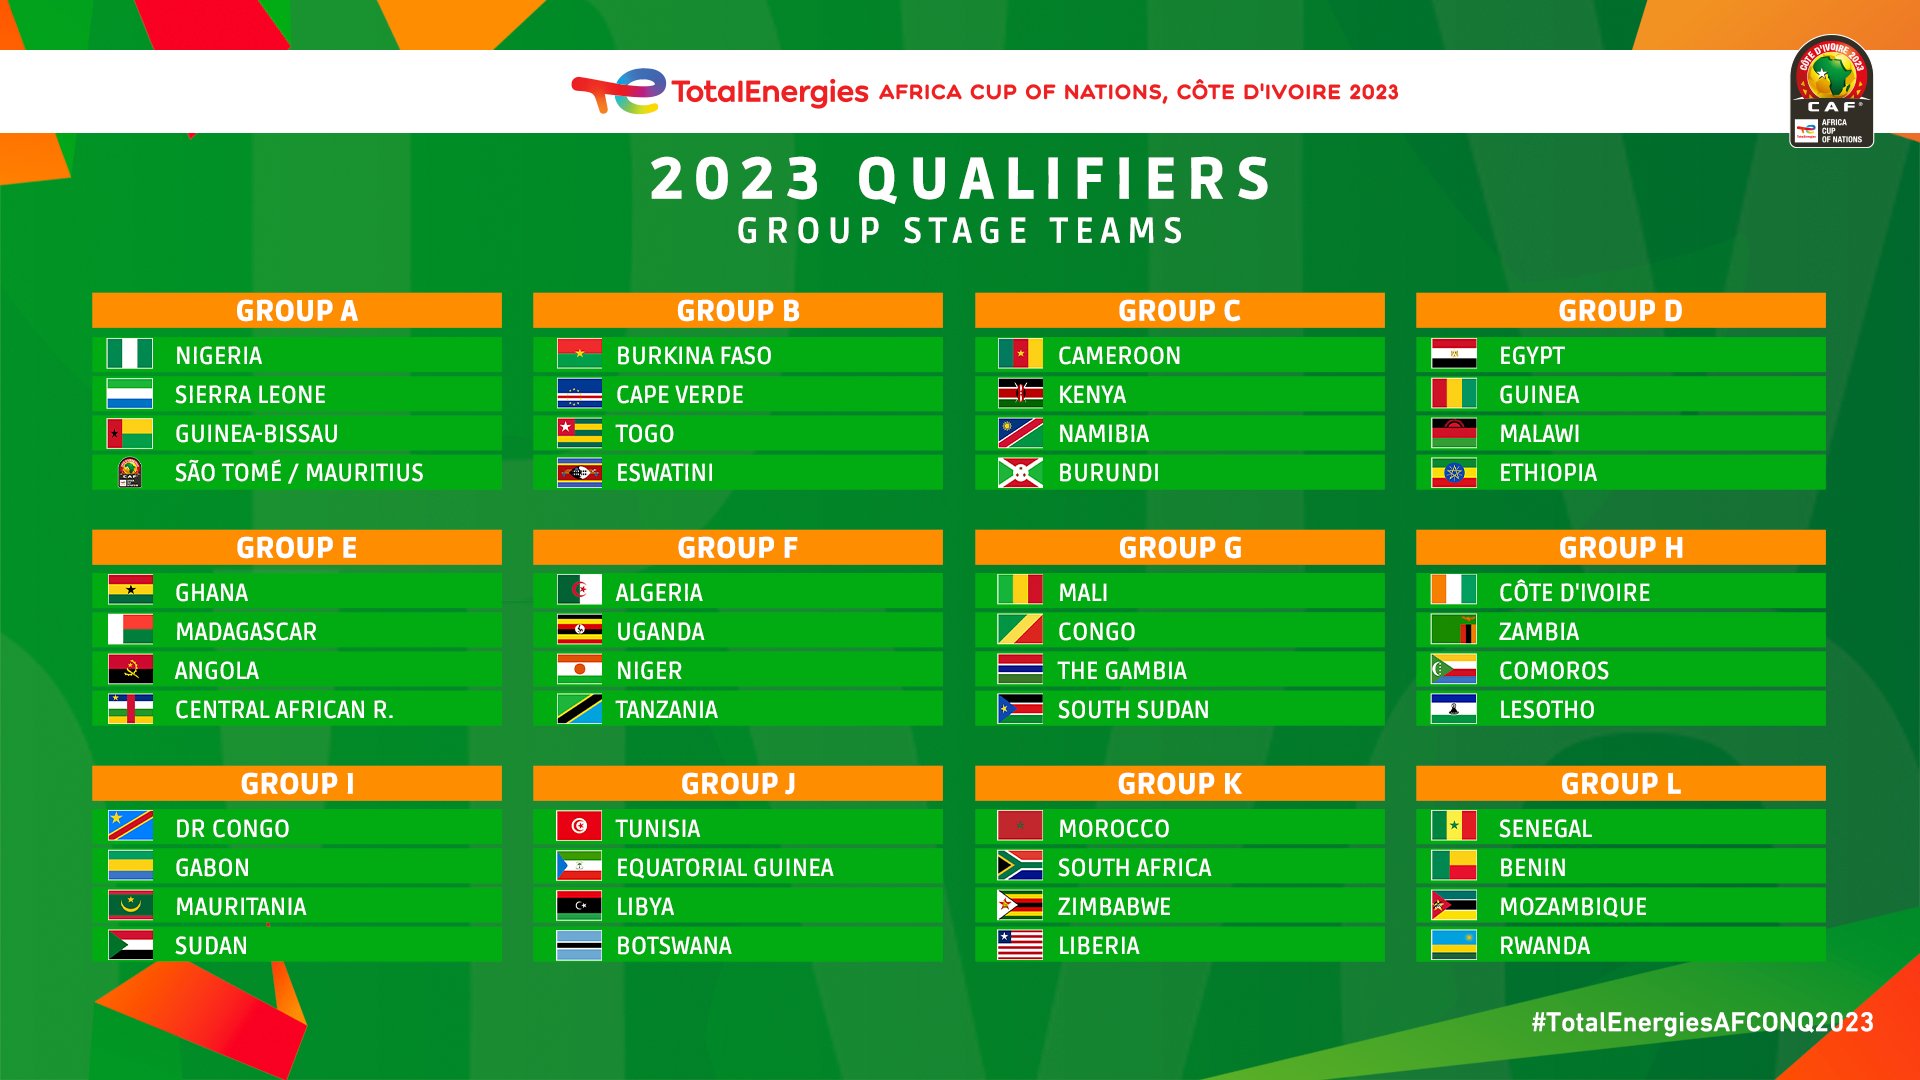 AFCON 2023 DRAW 